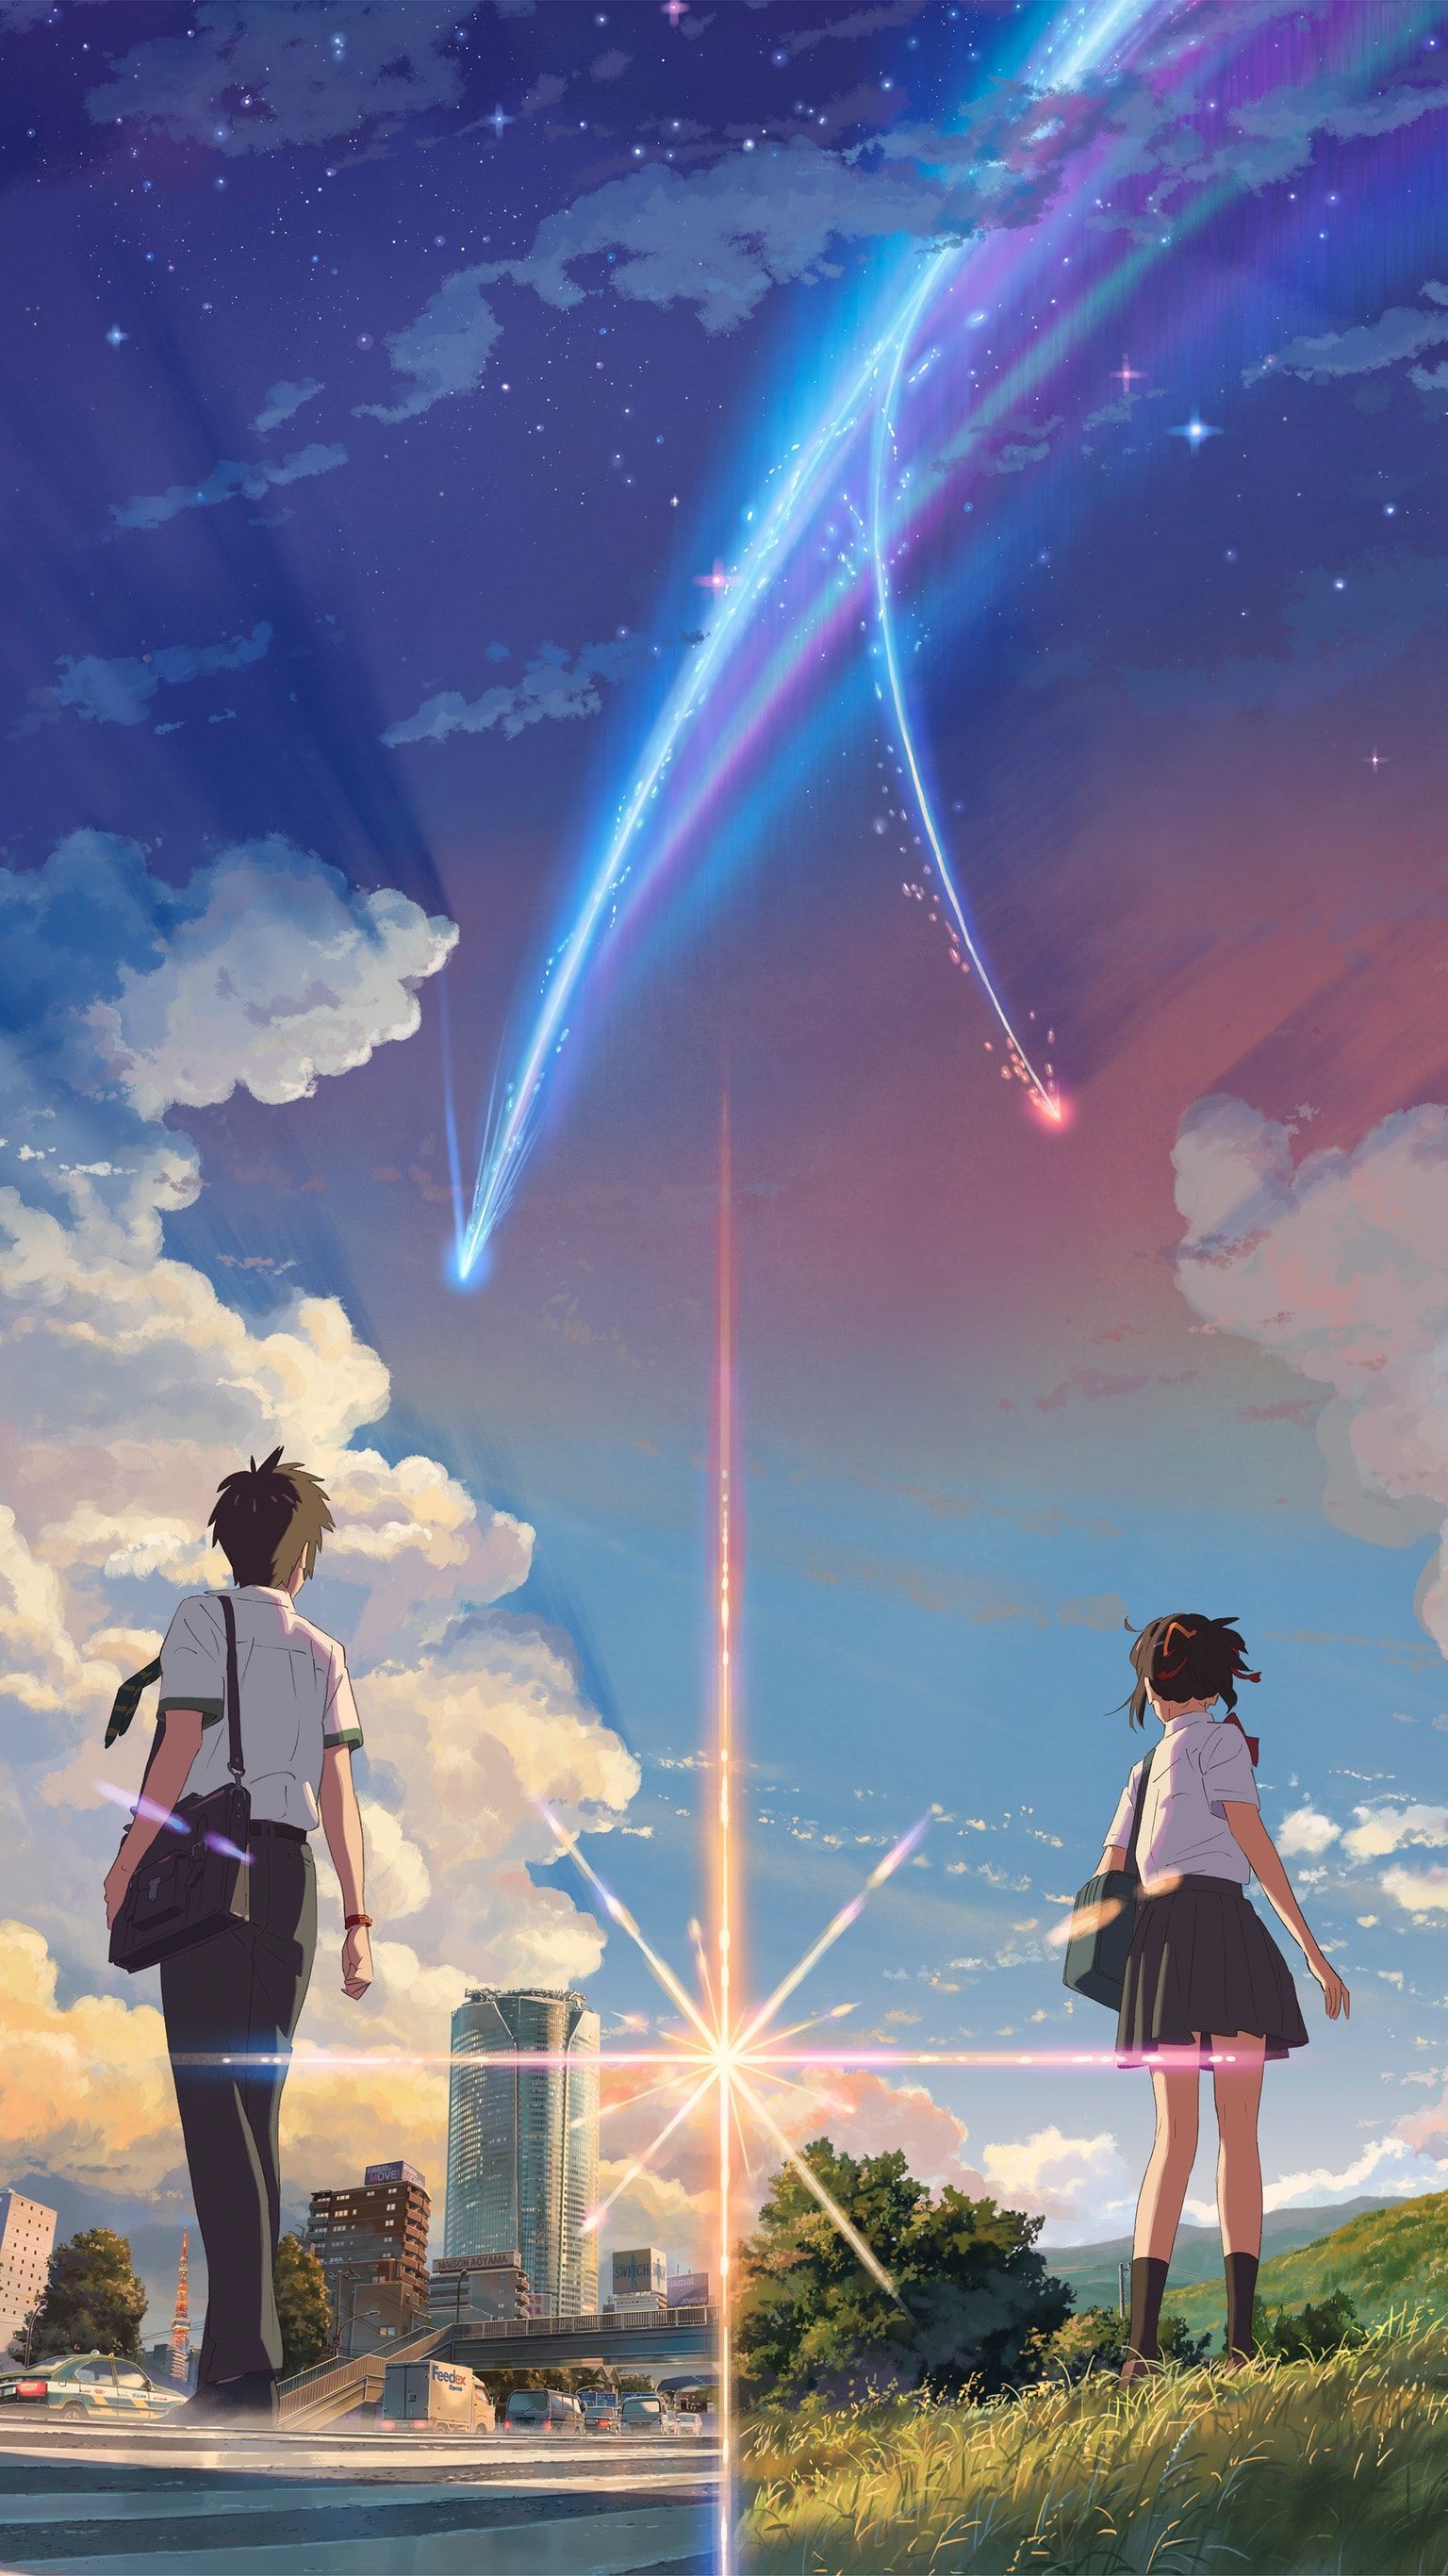 Your Name Anime 2016 Wallpaper Free Your Name Anime 2016 Background